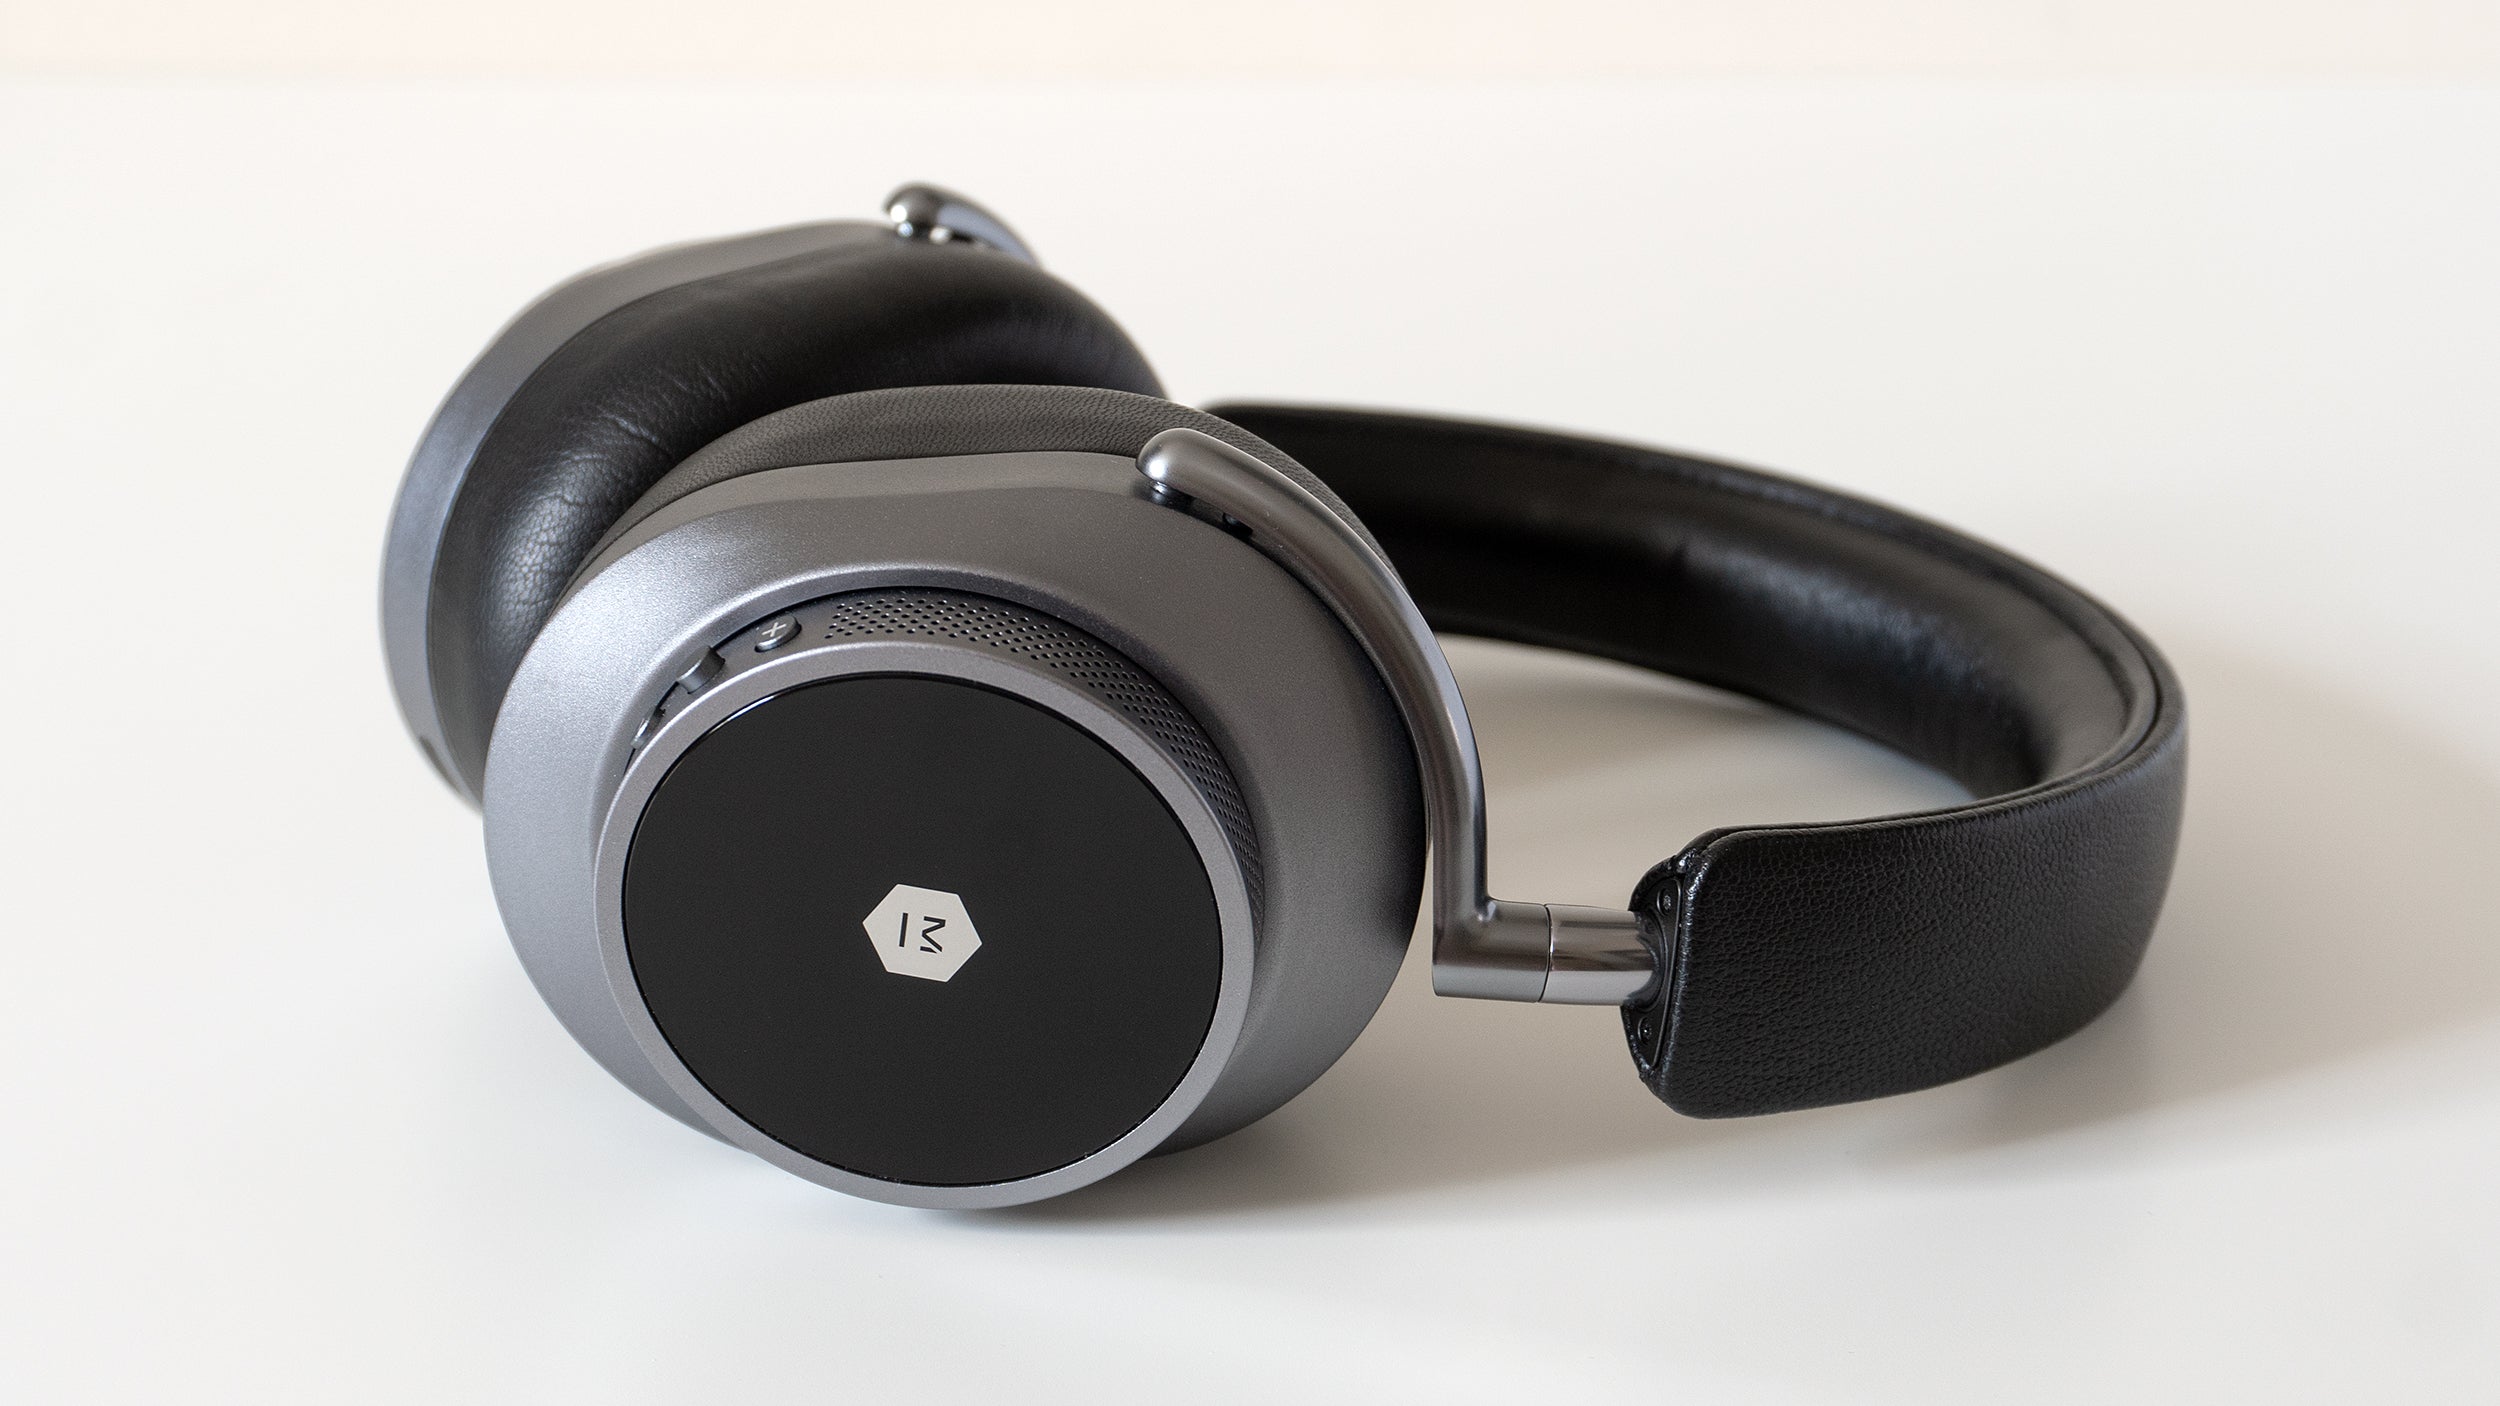 The Master & Dynamic MW75s feel great and sound even better, but disappointing ANC performance makes it hard to justify that $US600 ($833) price tag. (Photo: Andrew Liszewski | Gizmodo)